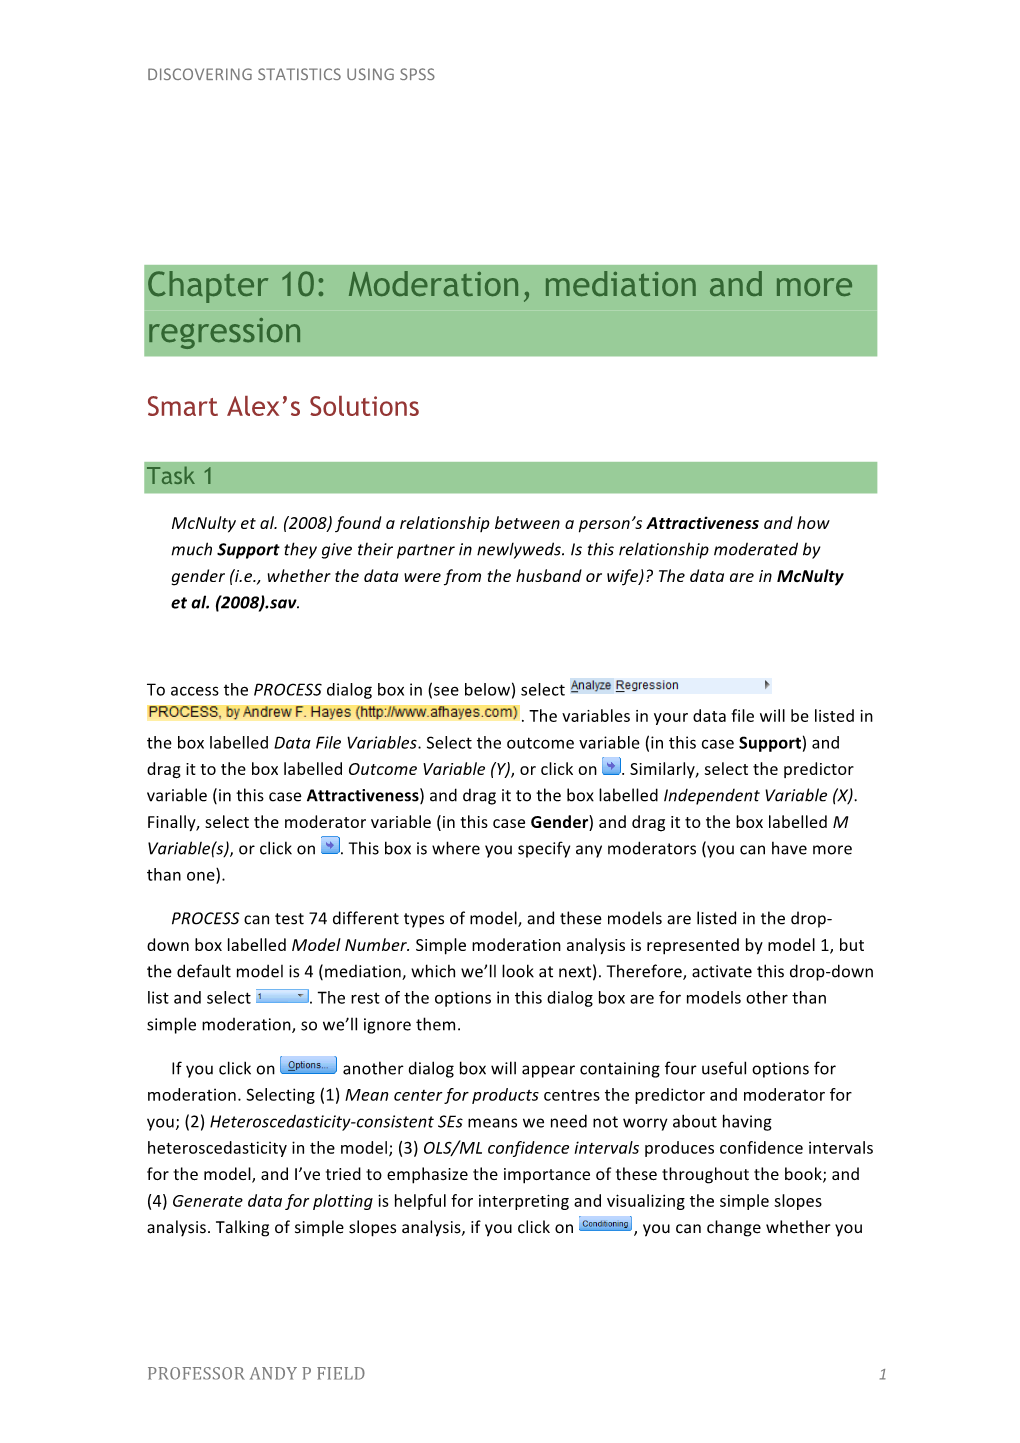 Chapter 10: Moderation, Mediation and More Regression